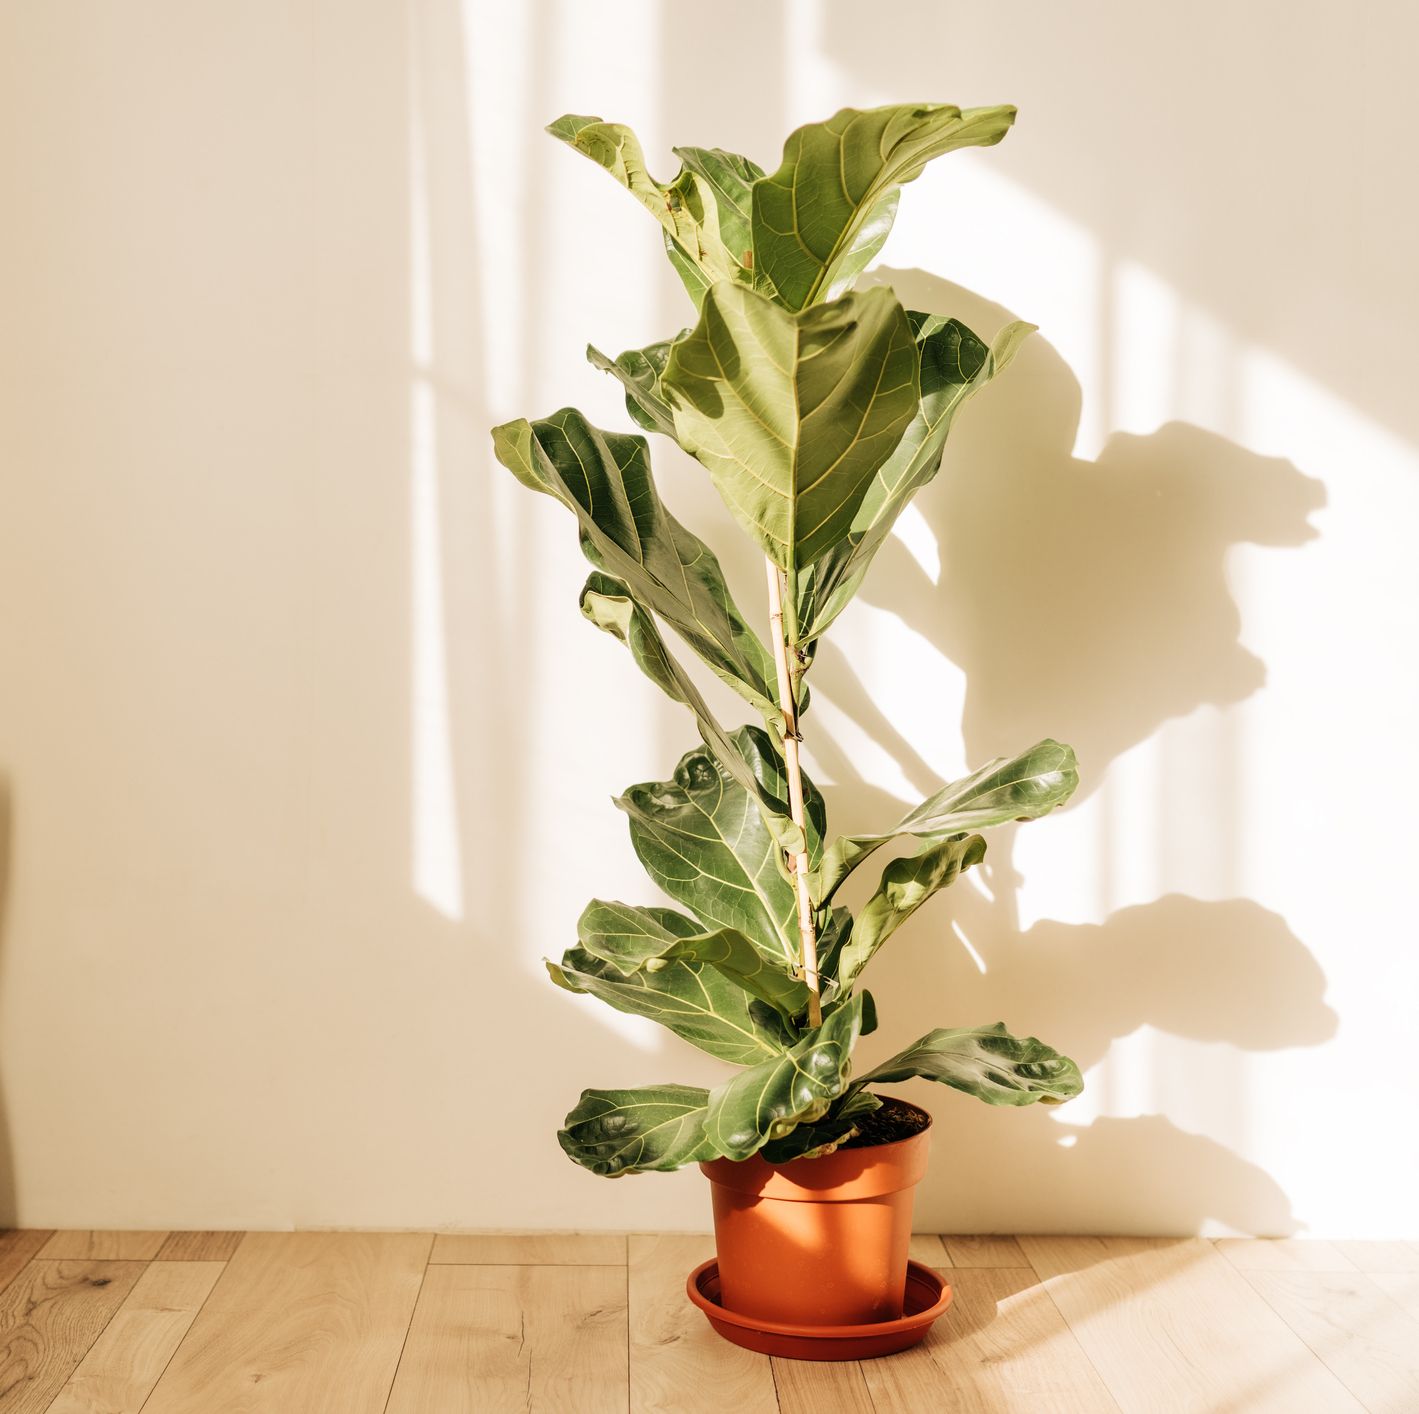 Buy a Fiddle Leaf Fig Tree for ONLY $39 With Amazon's Huge Sale on Plants